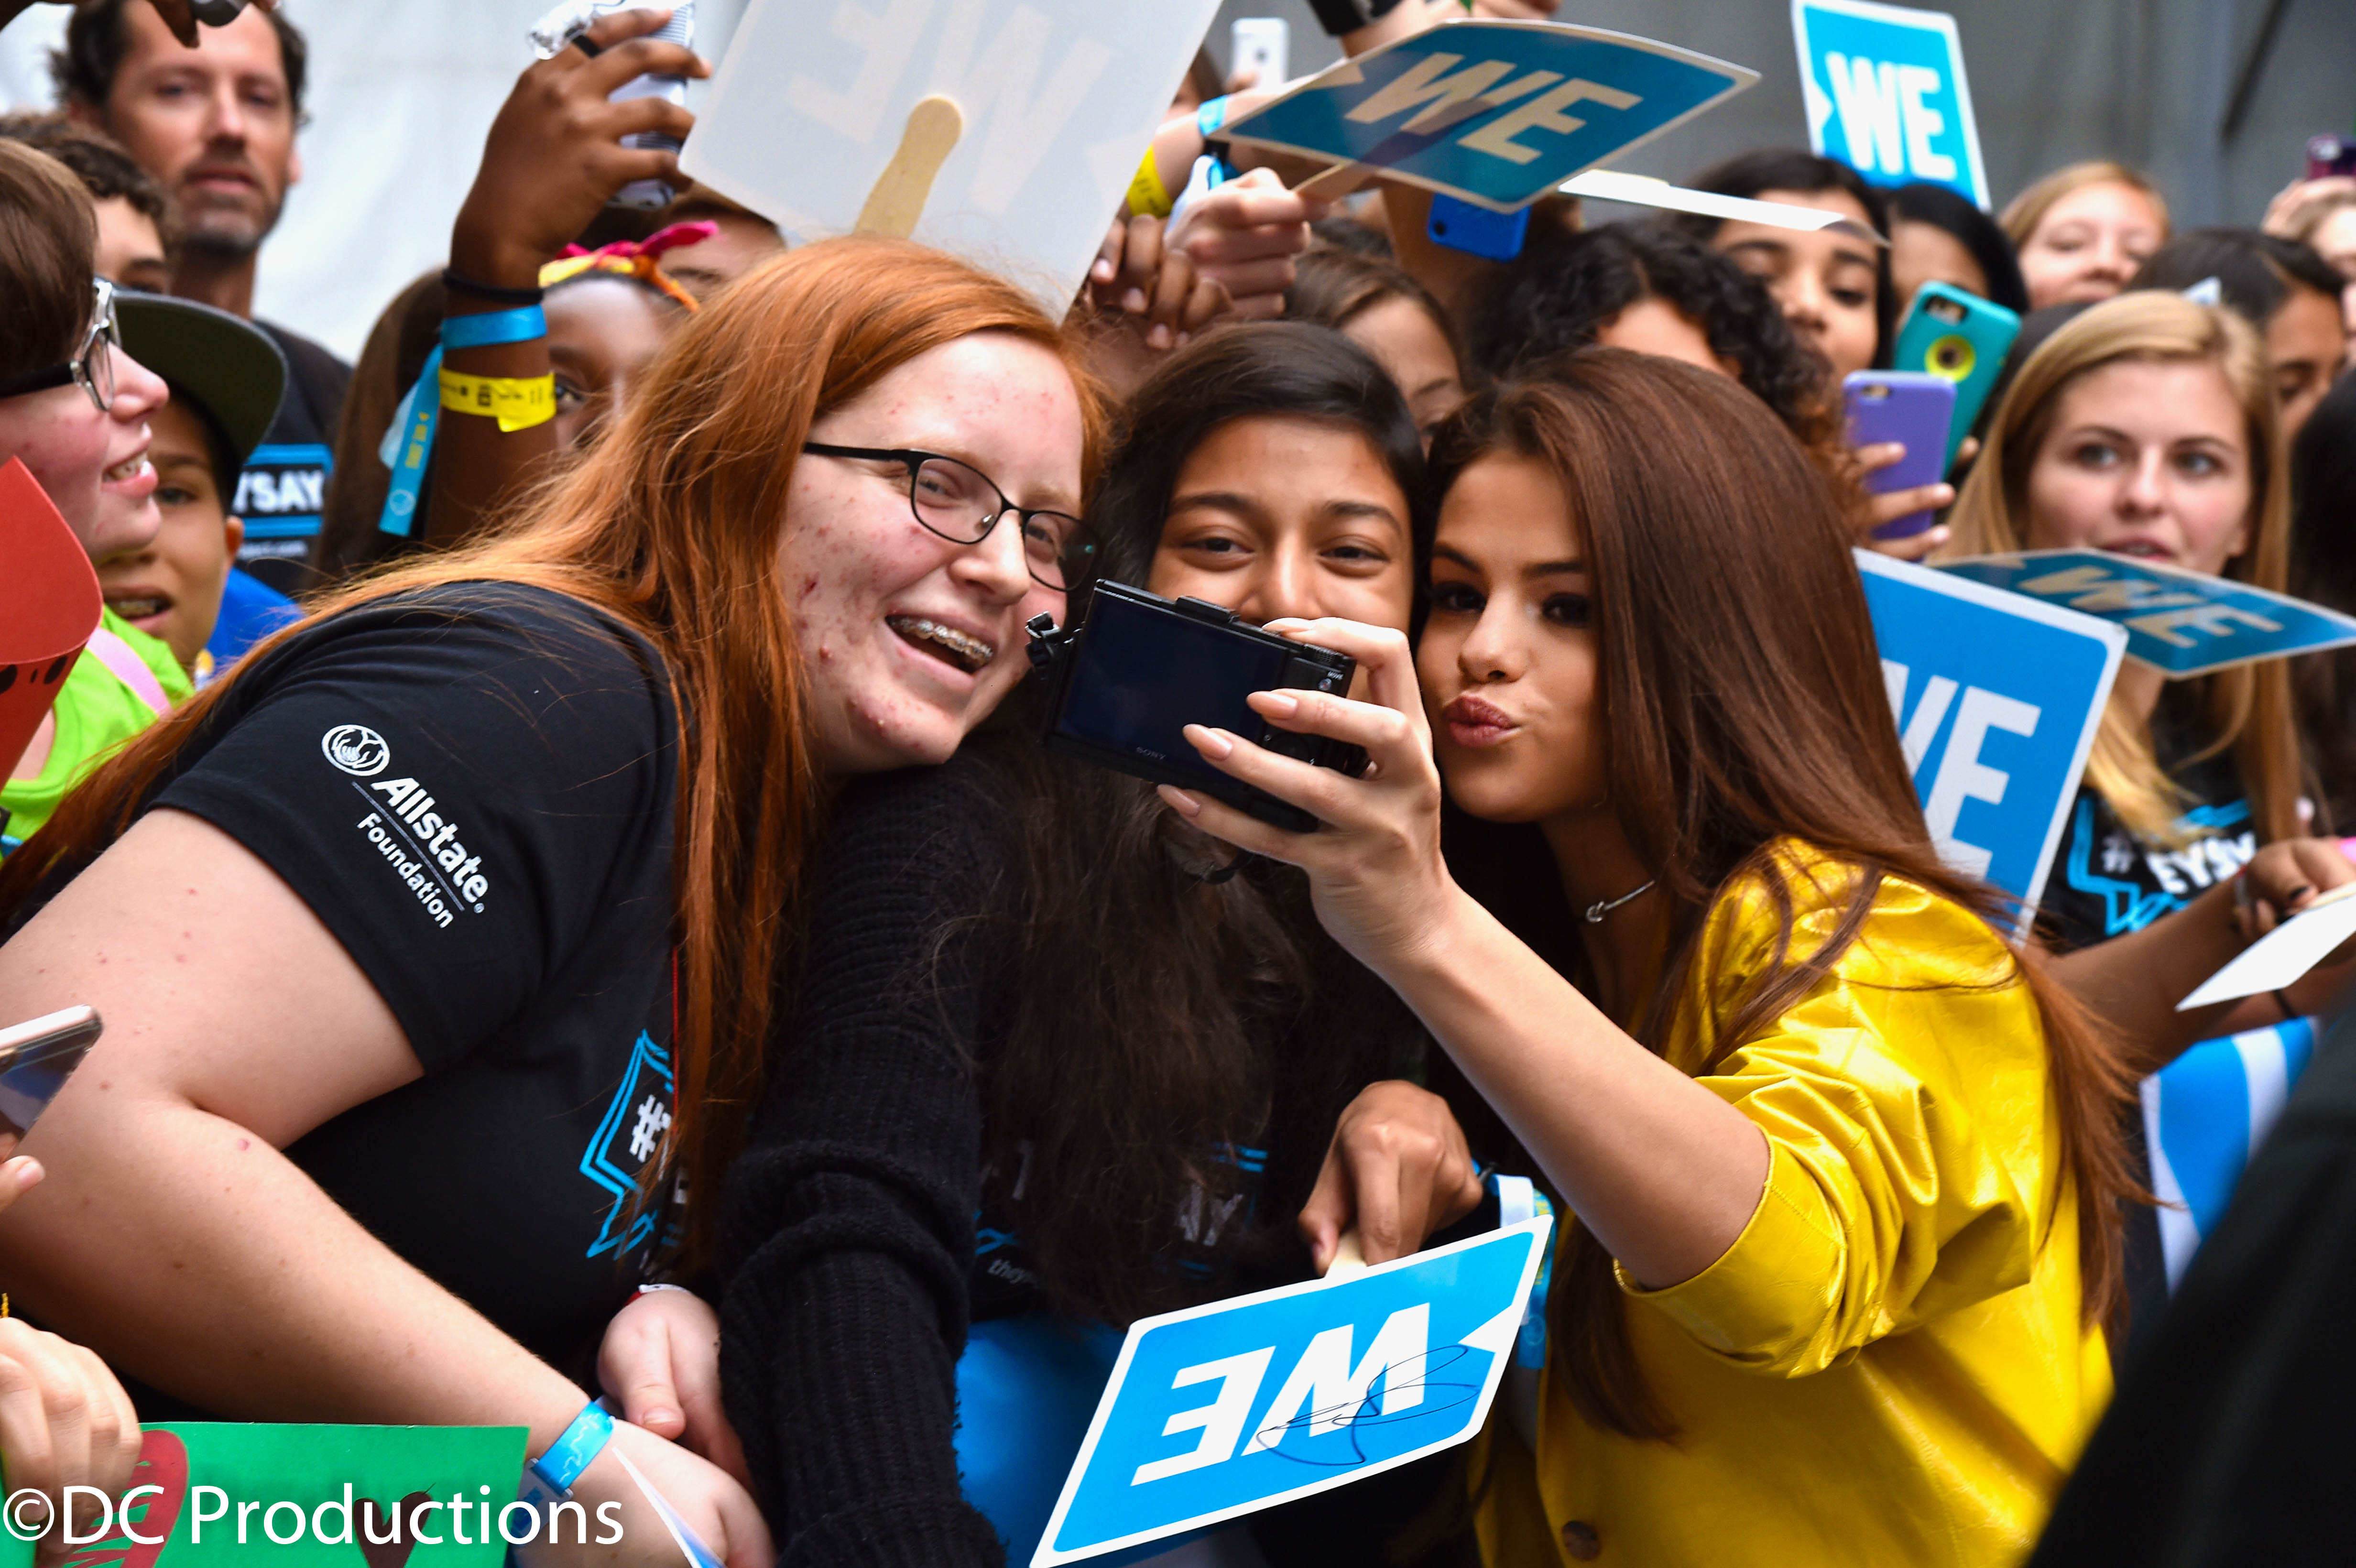 Selena Gomez, Tryese, Big Sean, Joe Janas, Paula Abduh and other celebrities give back to the youth at We Day California